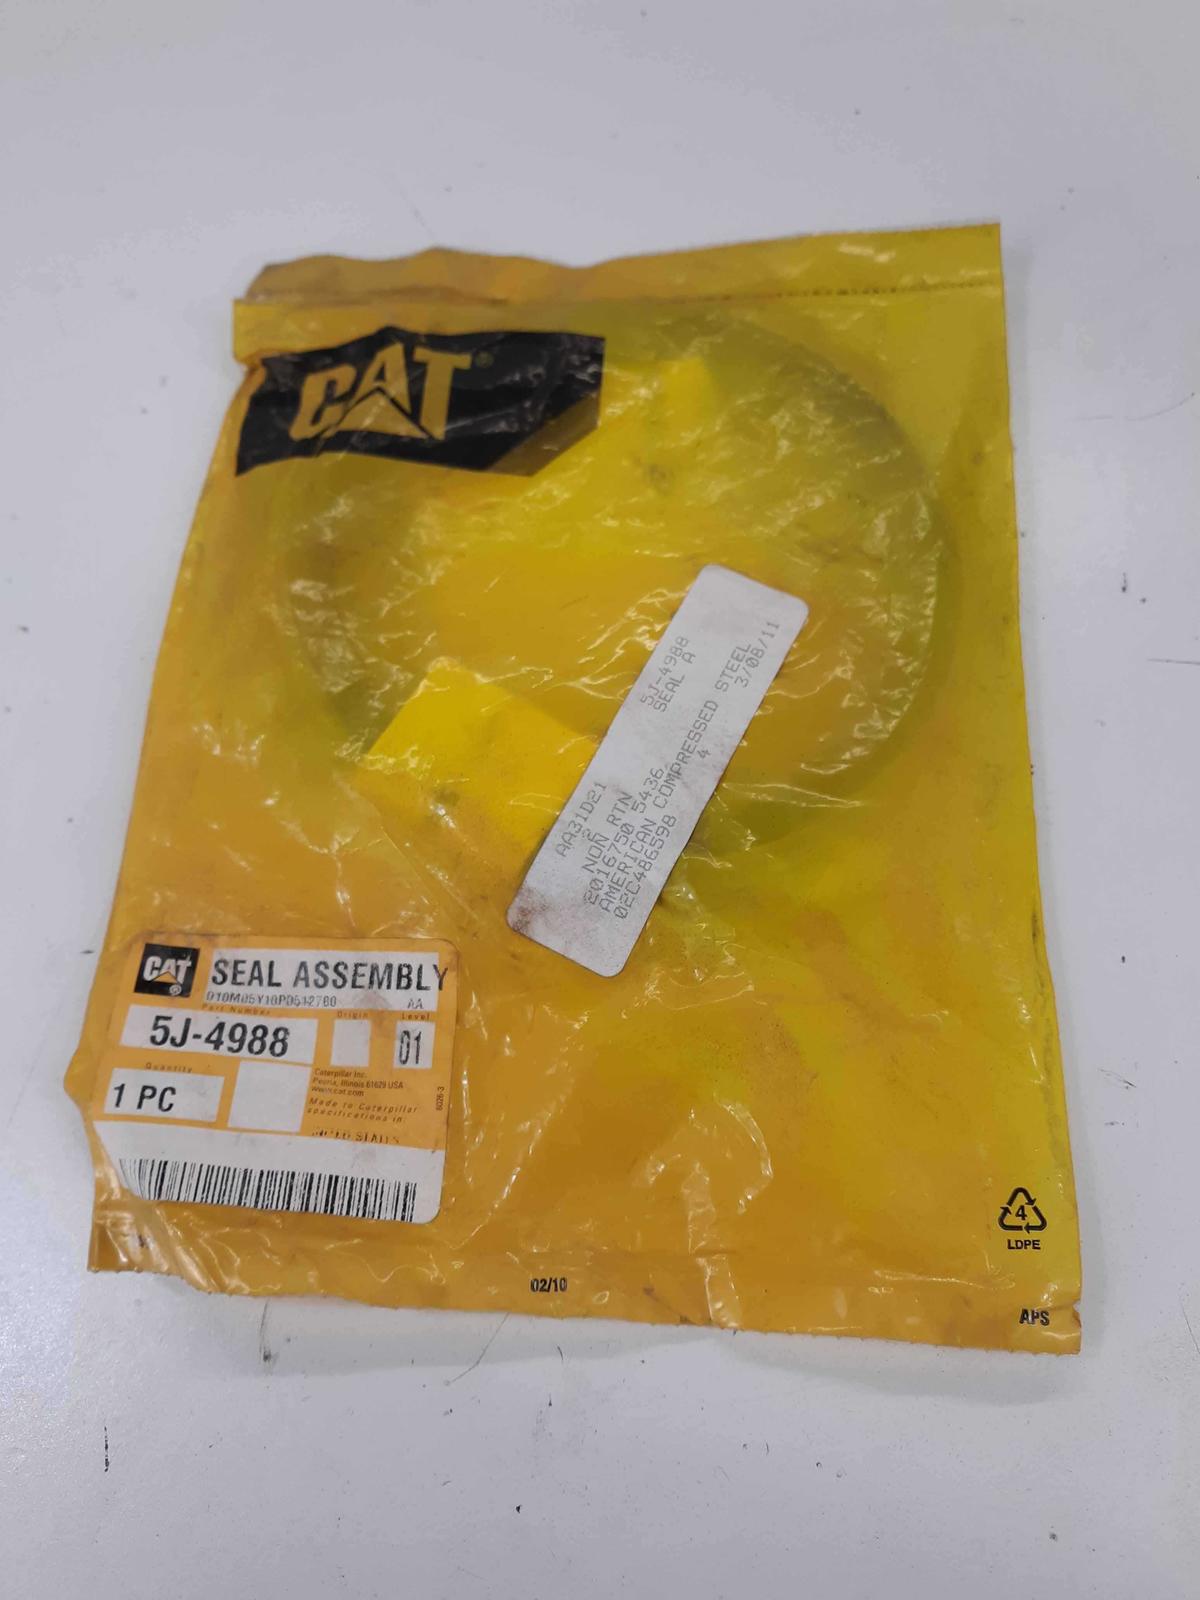 Primary image for Caterpillar Seal Assembly 5J4988 